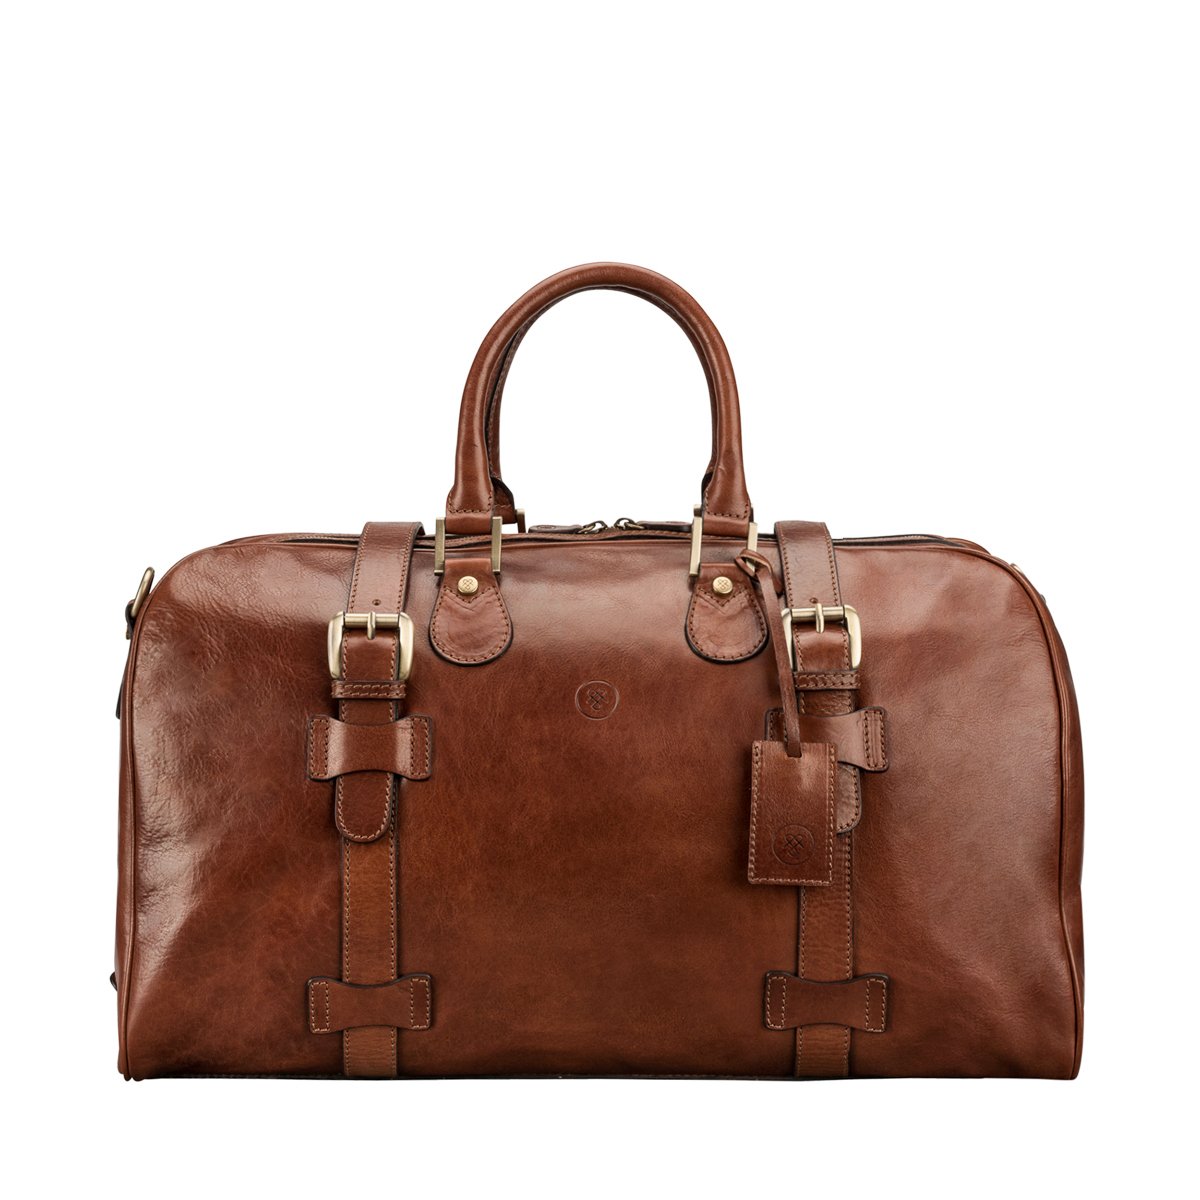 Handcrafted Leather Duffle Bag - USA MADE – The Local Branch